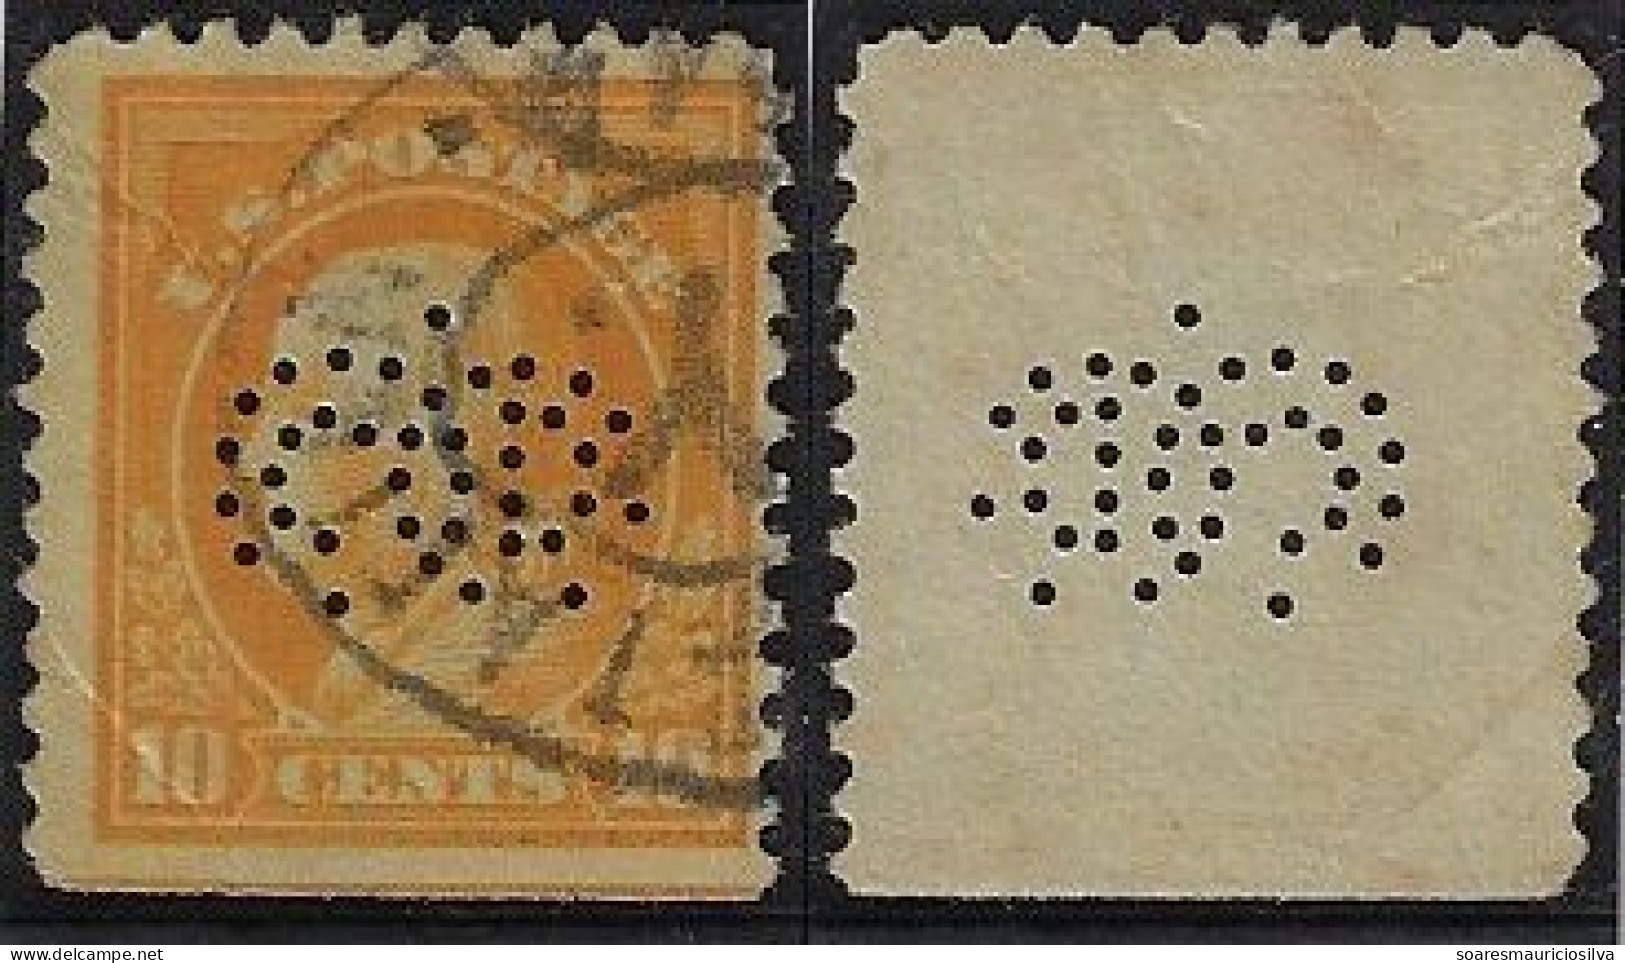 USA United States 1908/1917 Stamp With Perfin CD (circles) By Consolidated Dental Manufacturing Company Lochung Perfore - Perforados